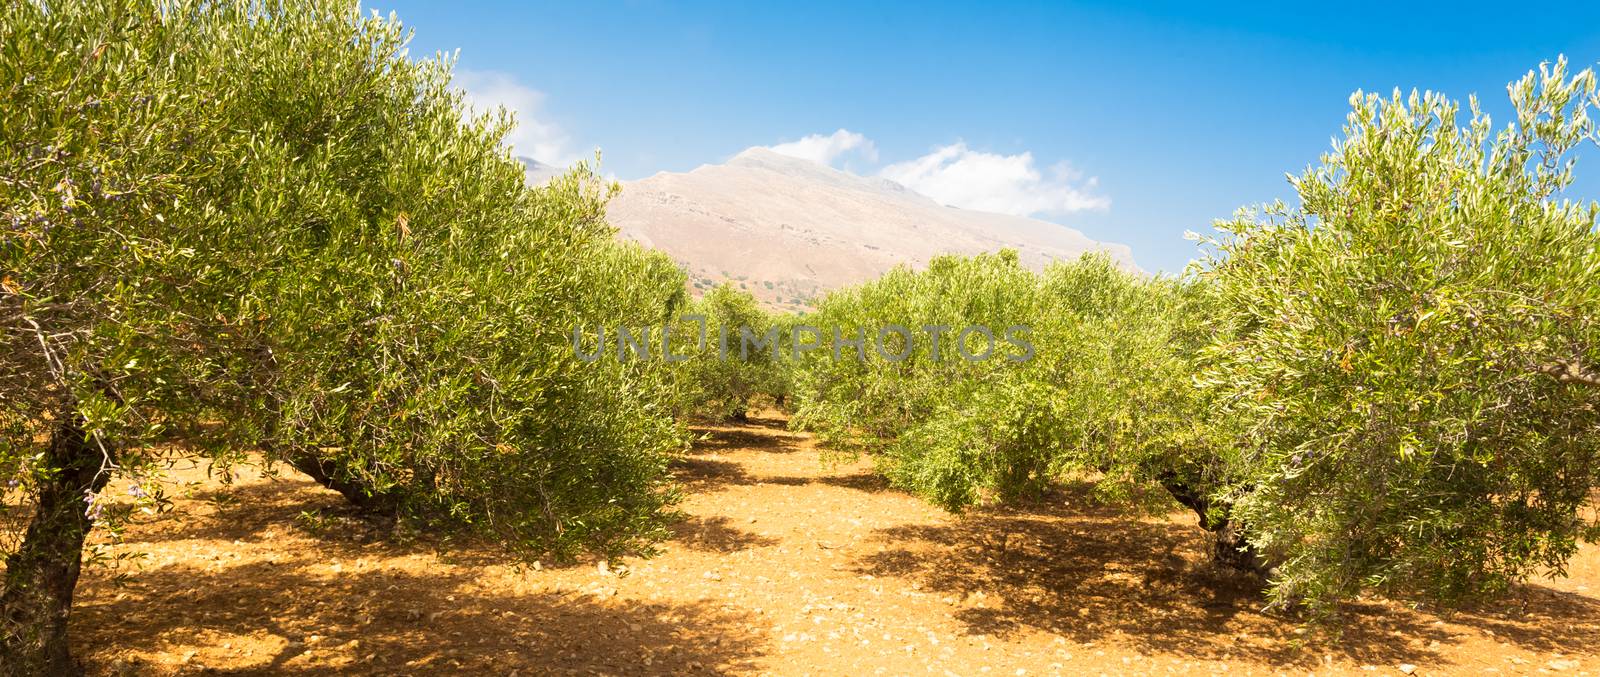 Olive grove on a hot summer day on Crete island, Greece.